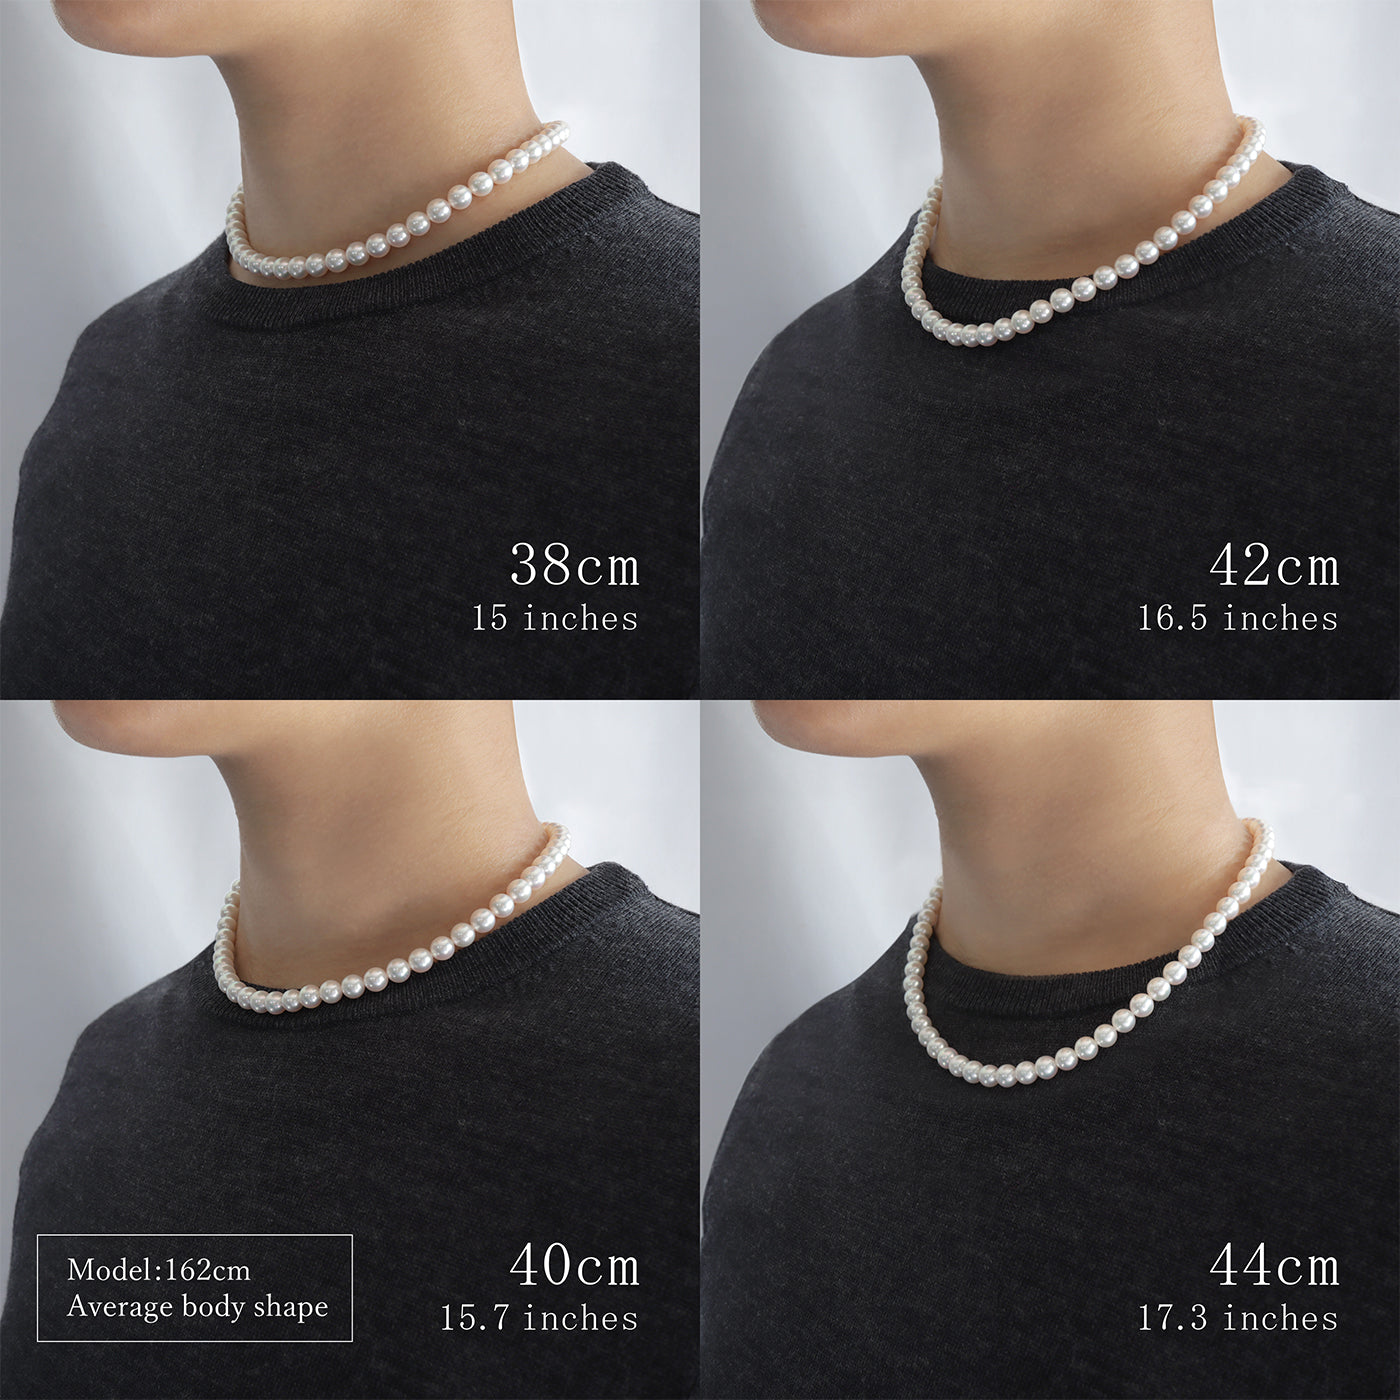 Akoya Pearl Necklace - 7.5-8.0mm アコヤパール